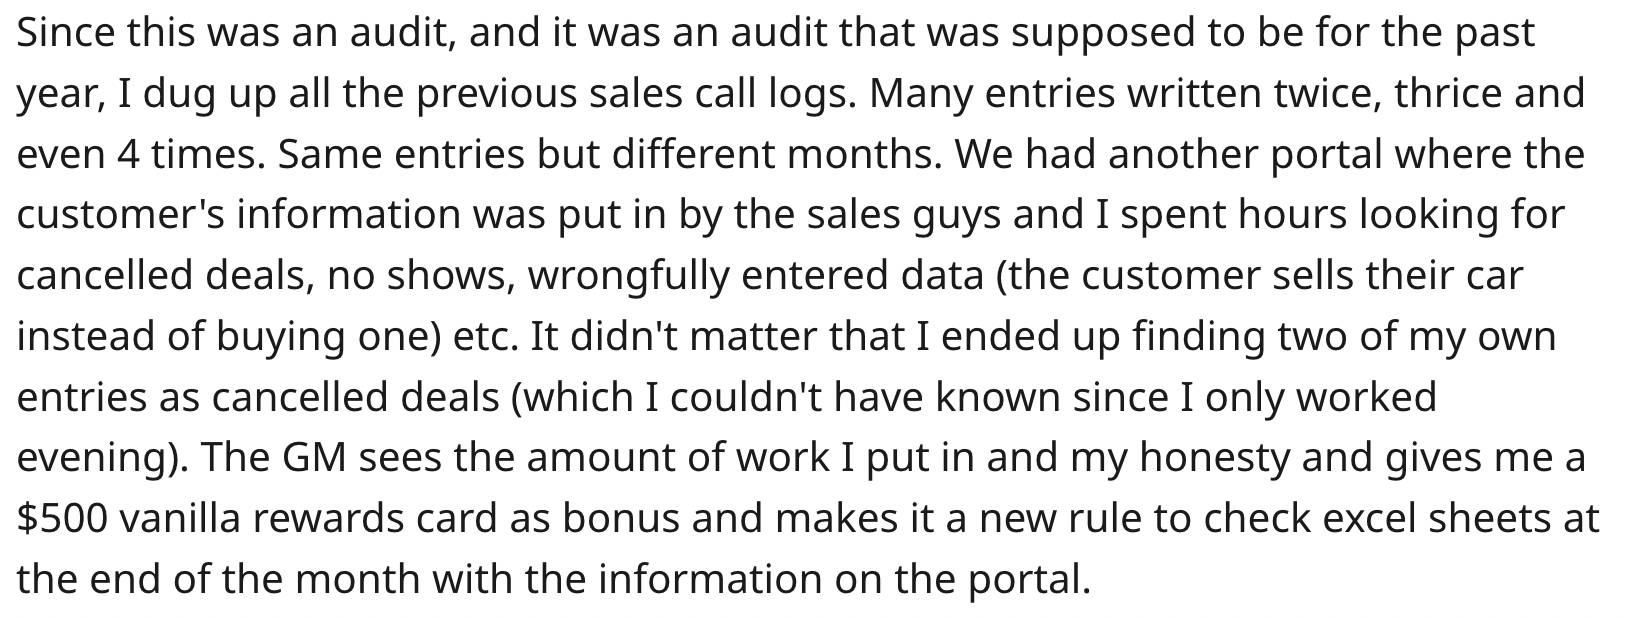 handwriting - Since this was an audit, and it was an audit that was supposed to be for the past year, I dug up all the previous sales call logs. Many entries written twice, thrice and even 4 times. Same entries but different months. We had another portal